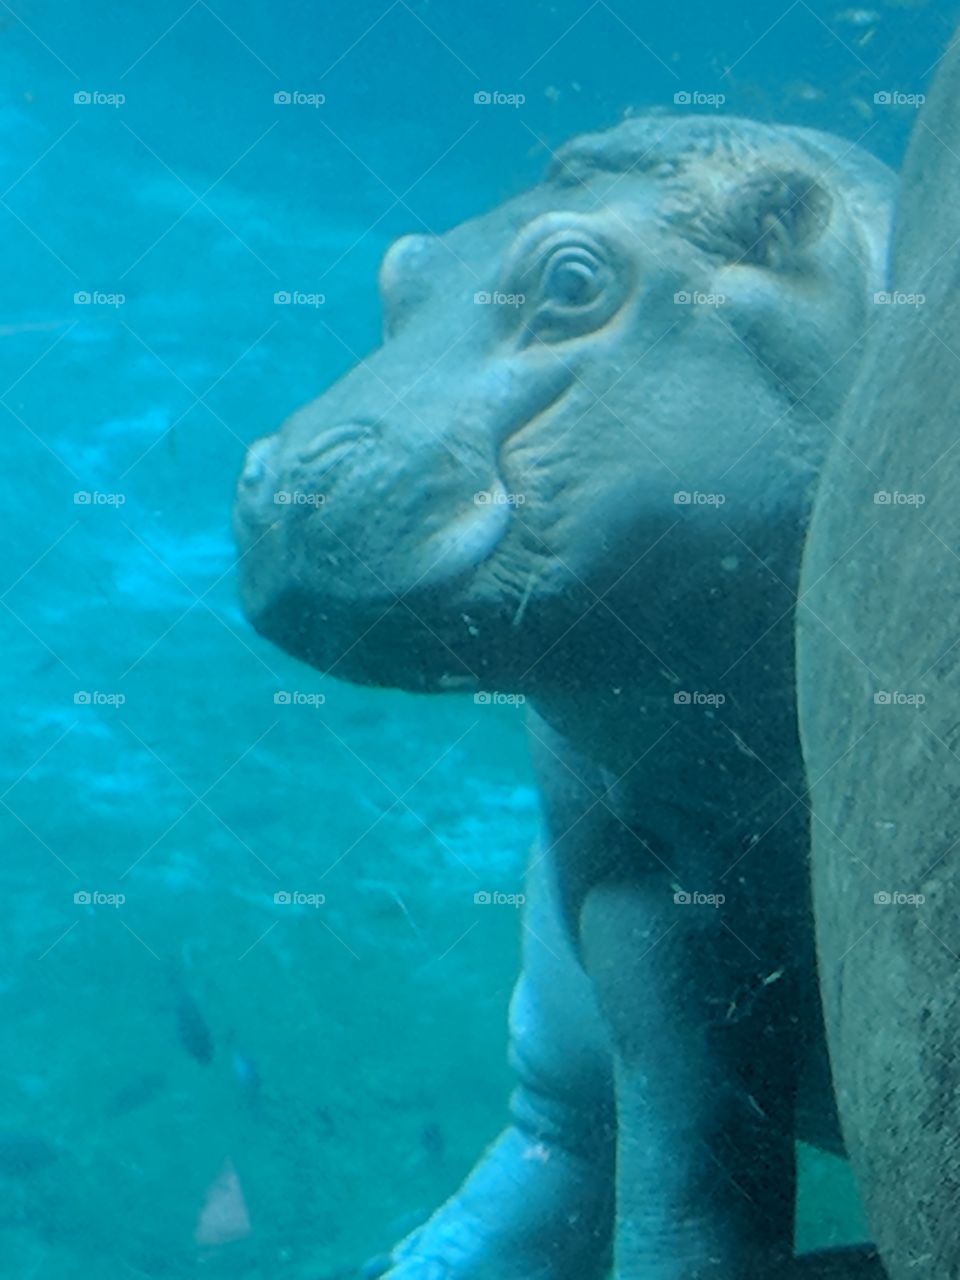 Justin, the baby hippo, at the San Diego Zoo.